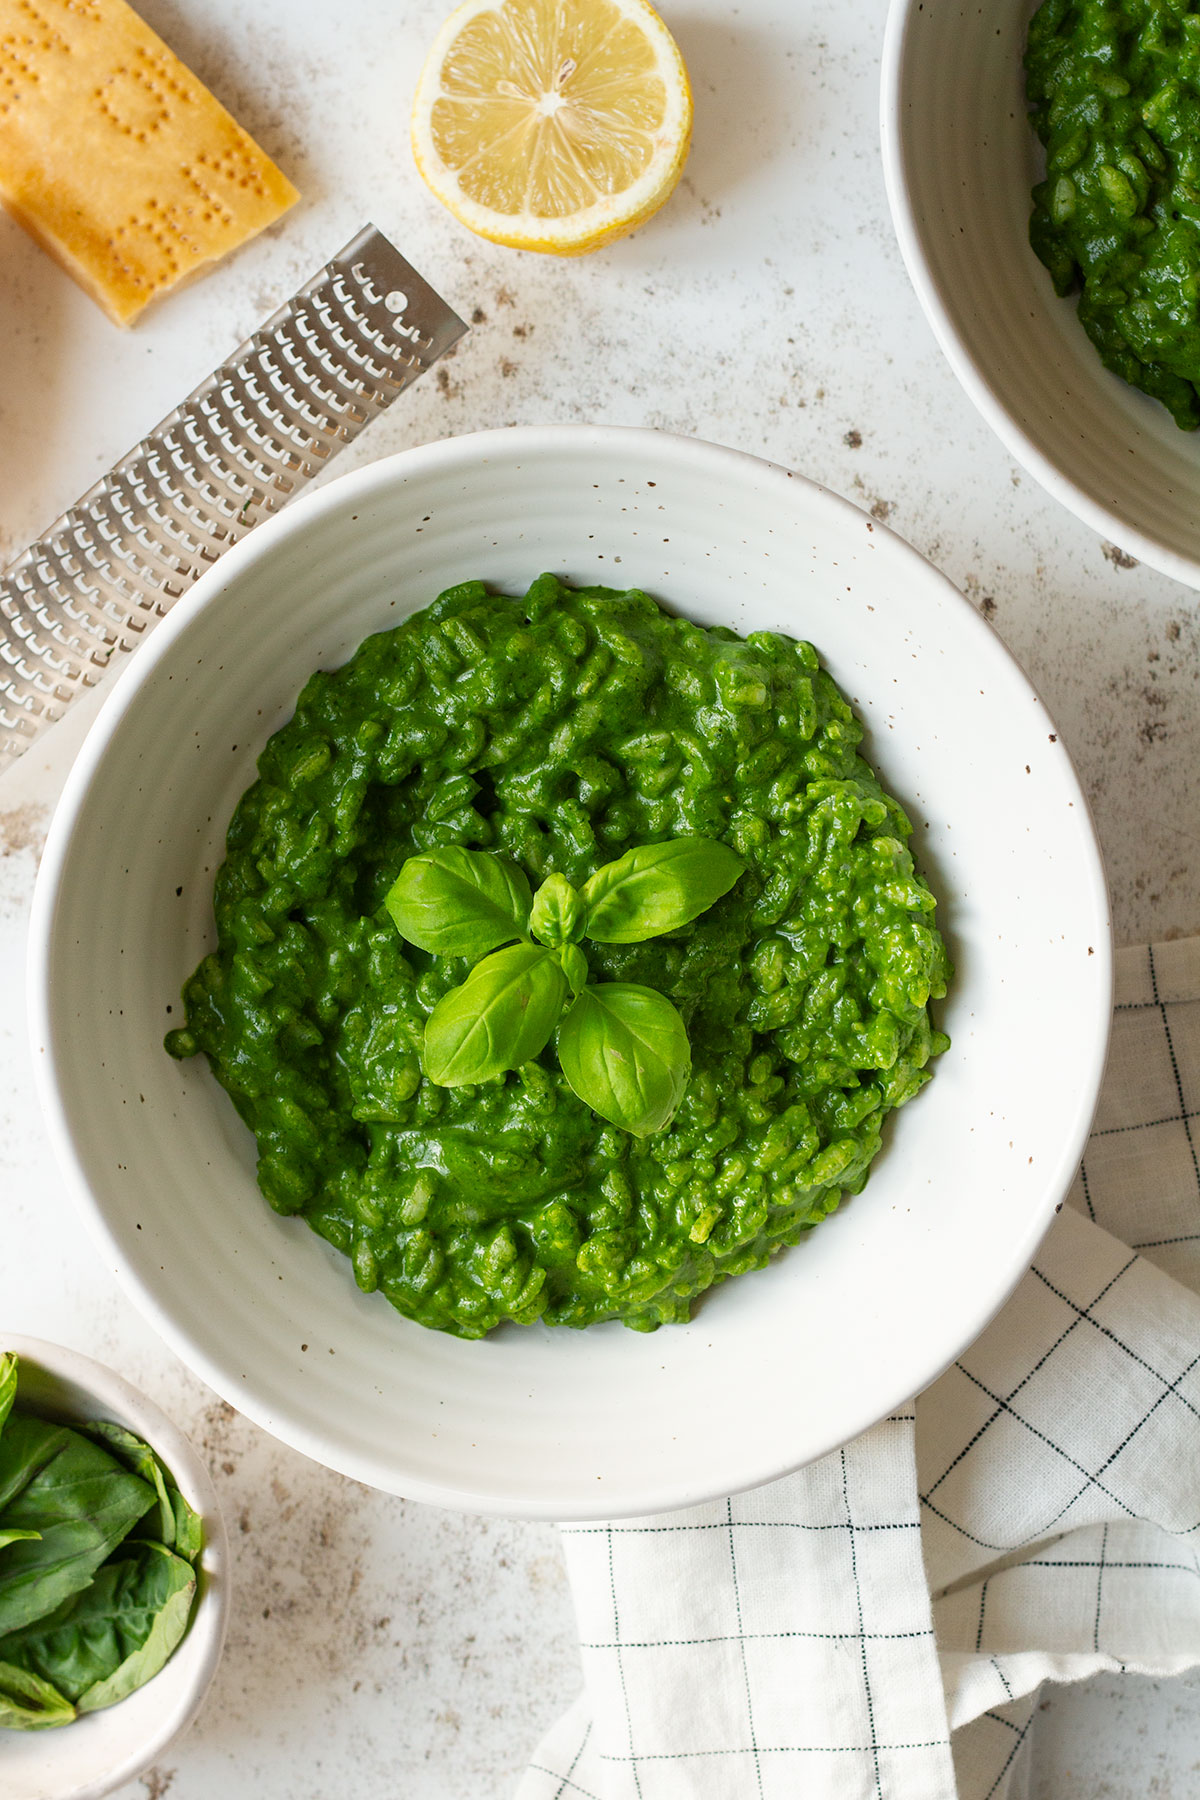 Risotto Verde with a basil garnish served in a white bowl with lemon and Parmesan on the side.